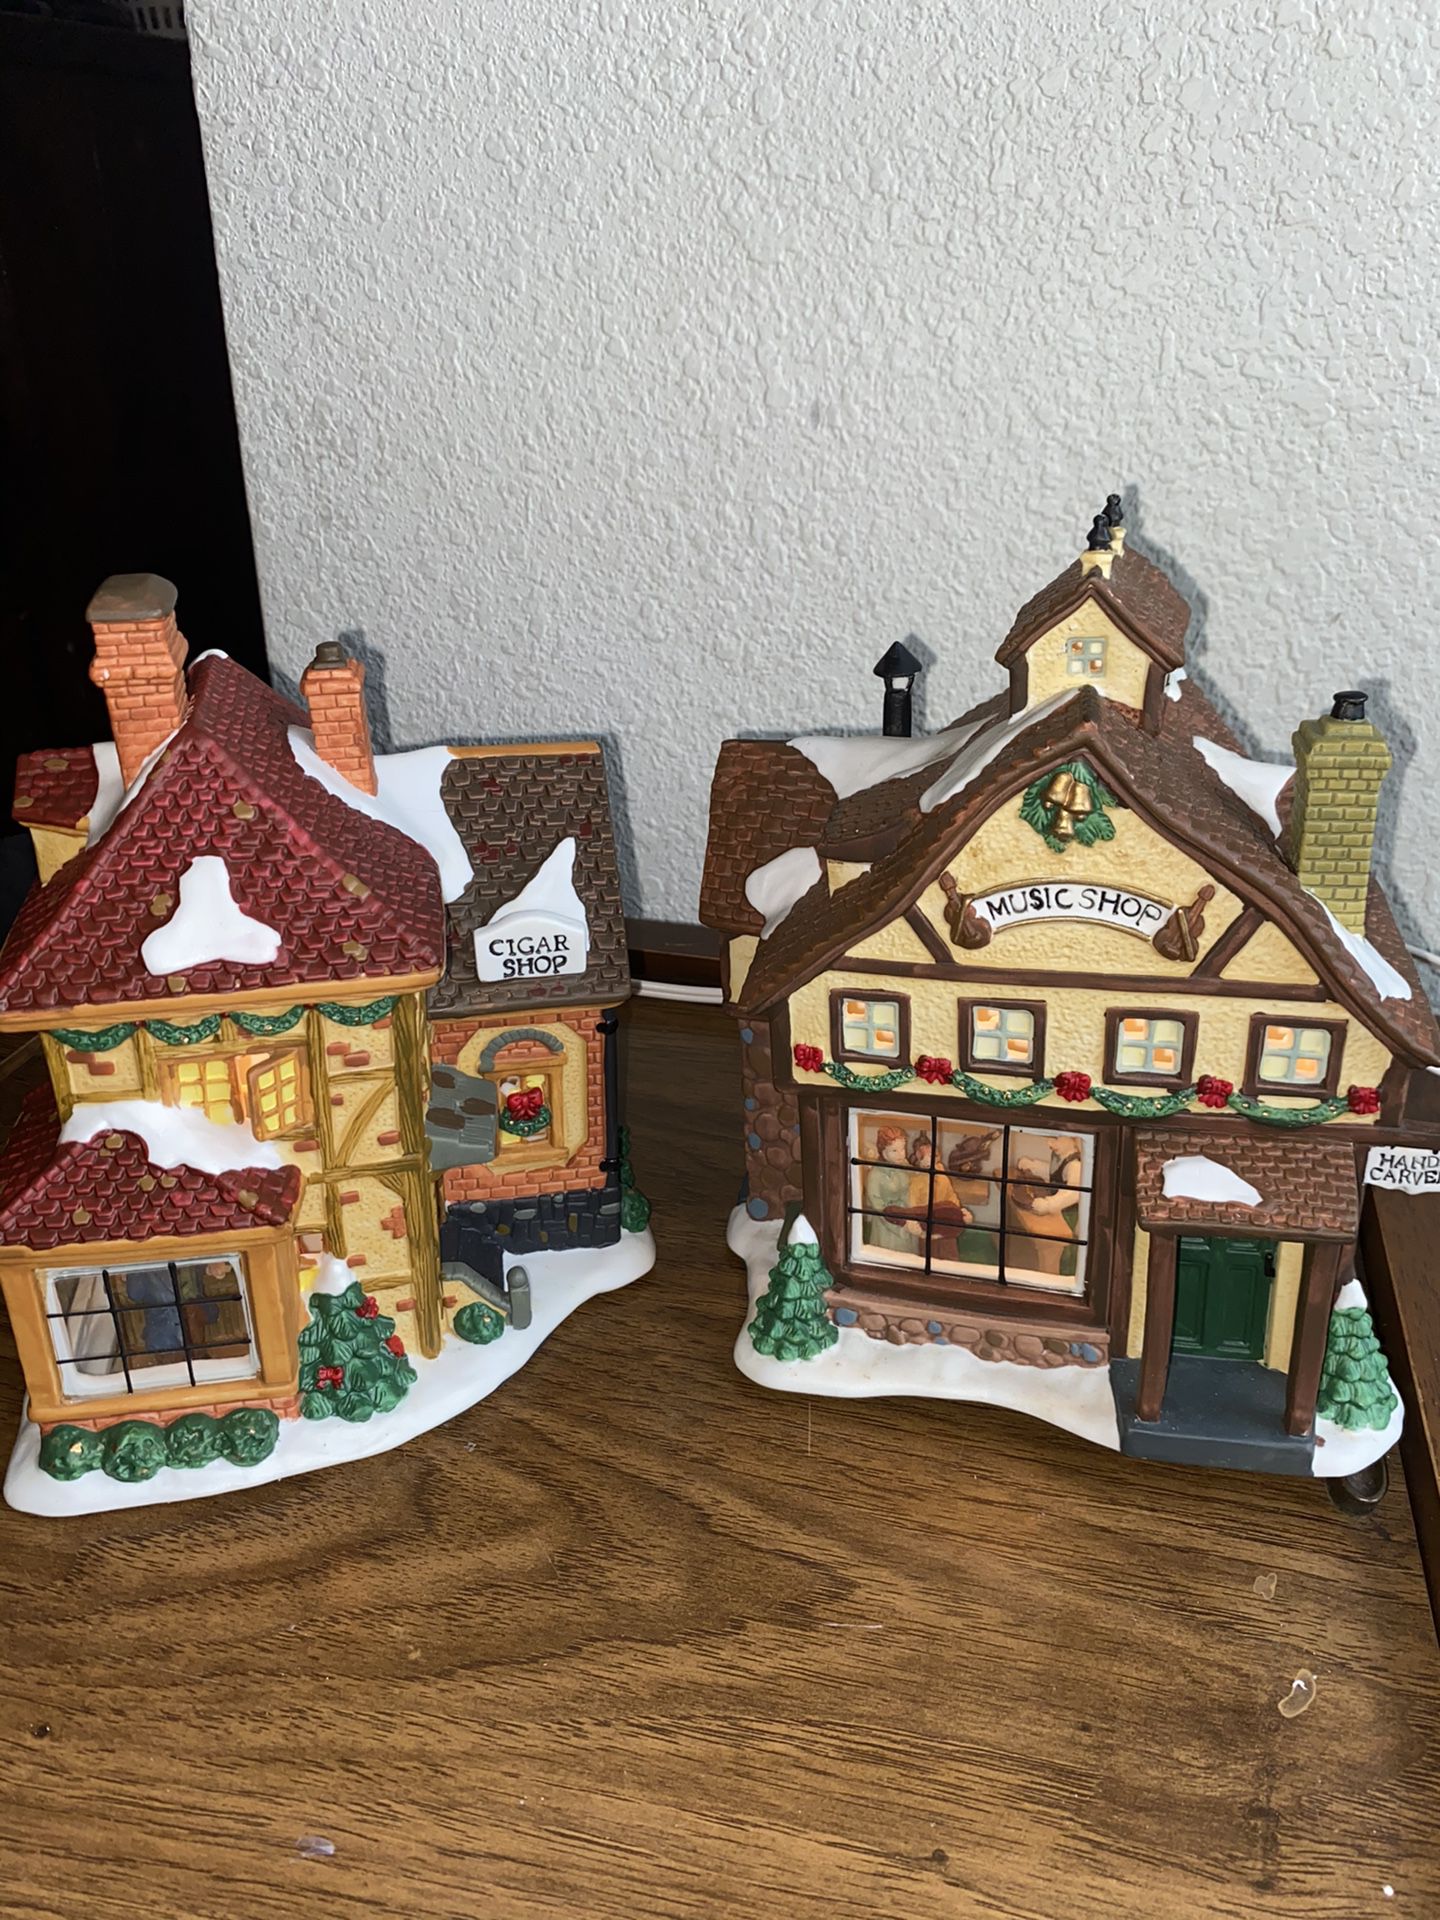 Christmas Town Light-Up Home Decorations (Music Shop and Cigar Shop)